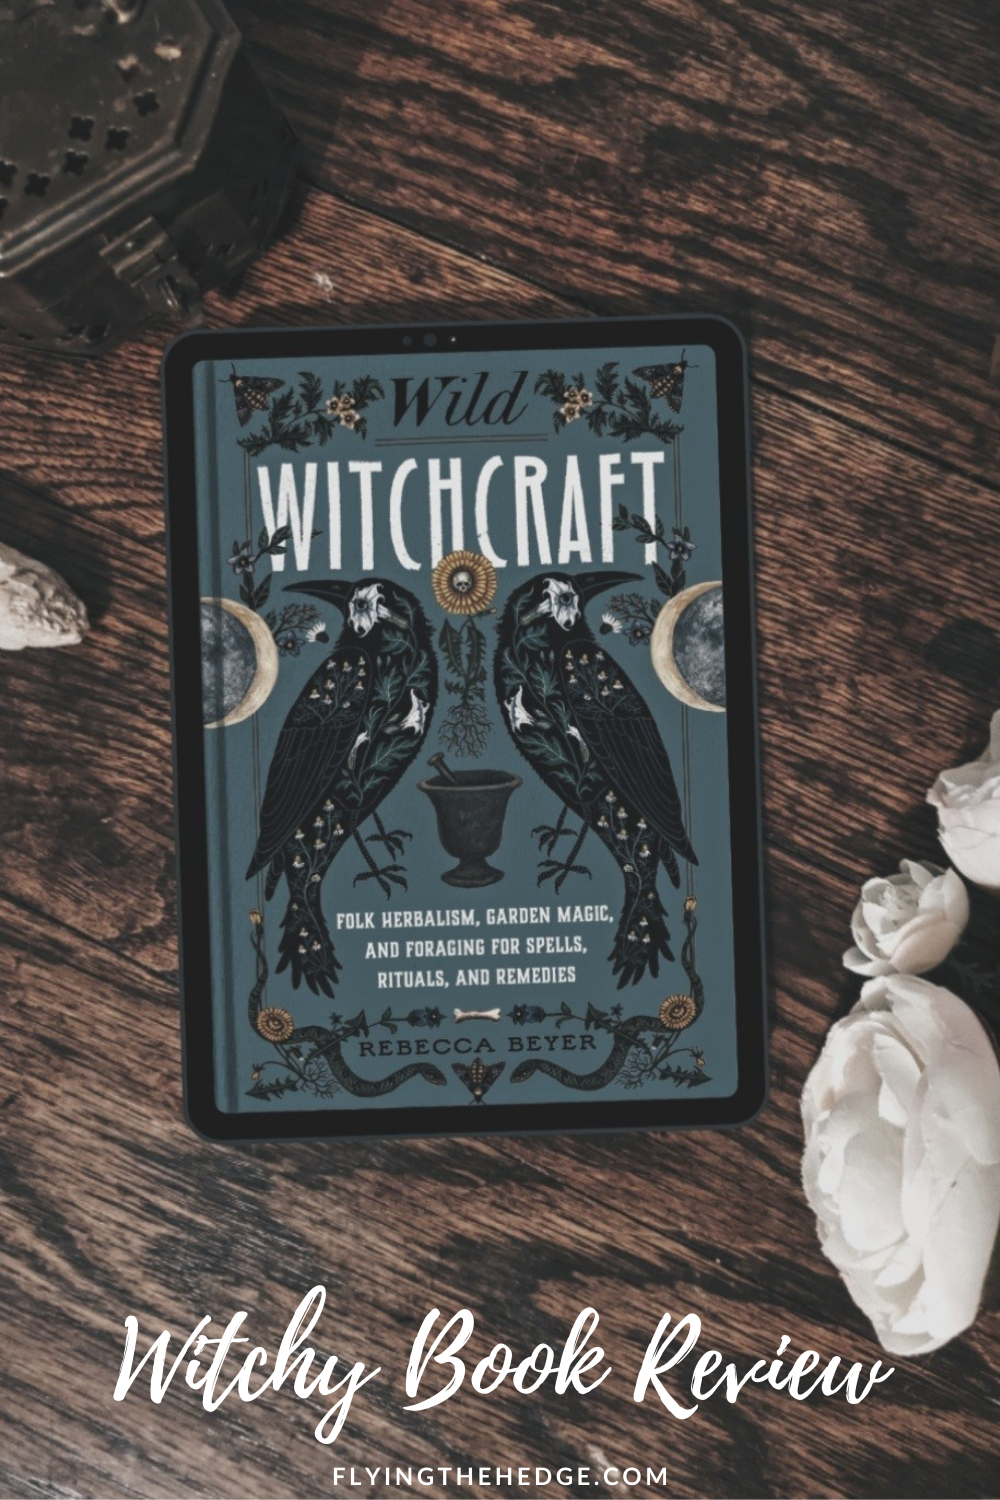 foraging, gardening, wildcraft, Appalachian folklore, plant magic, herbalism, herbal remedies, folklore, folk magic, book review, witch, witchcraft, wicca, wiccan, pagan, neopagan, witchy reads, witch book